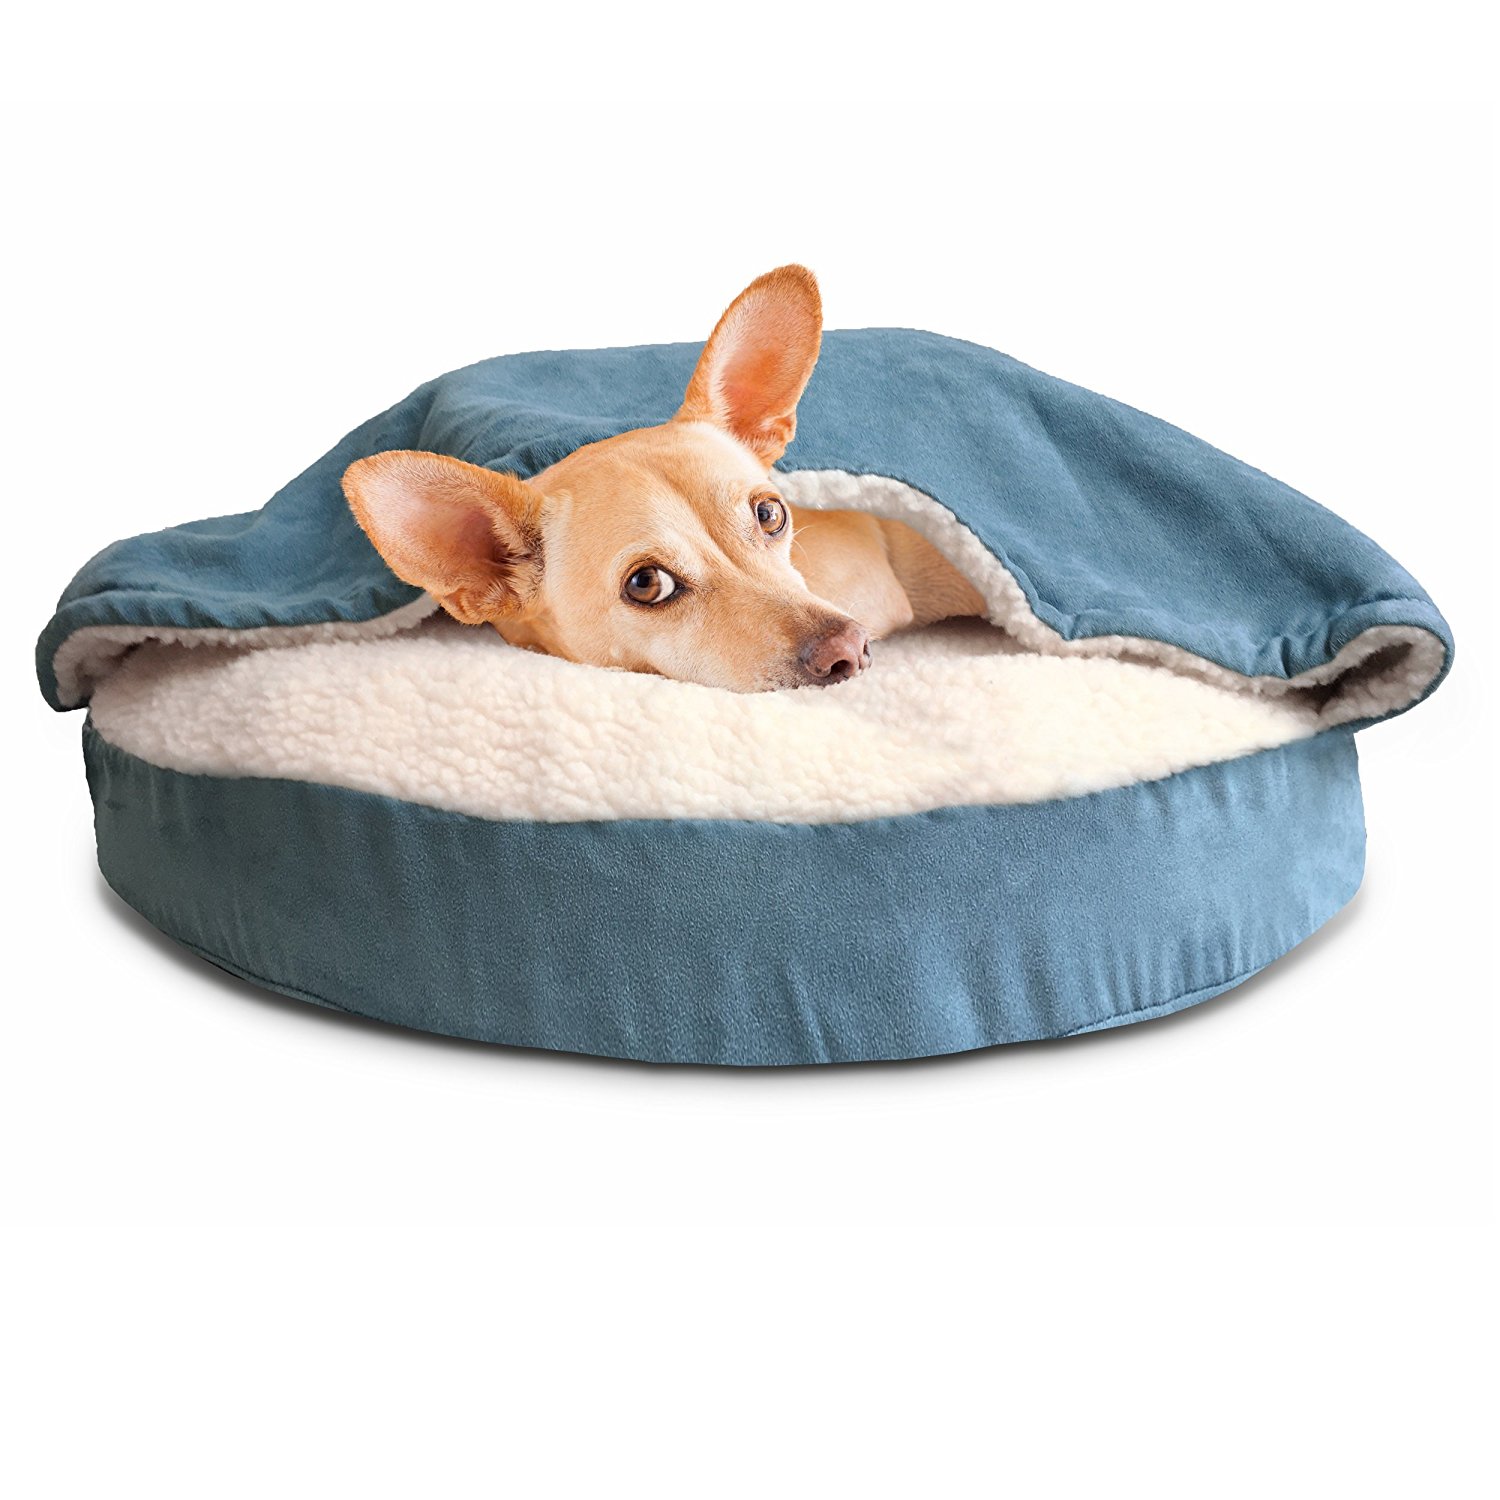 FurHaven Round Snuggery Burrow Pet Bed picture